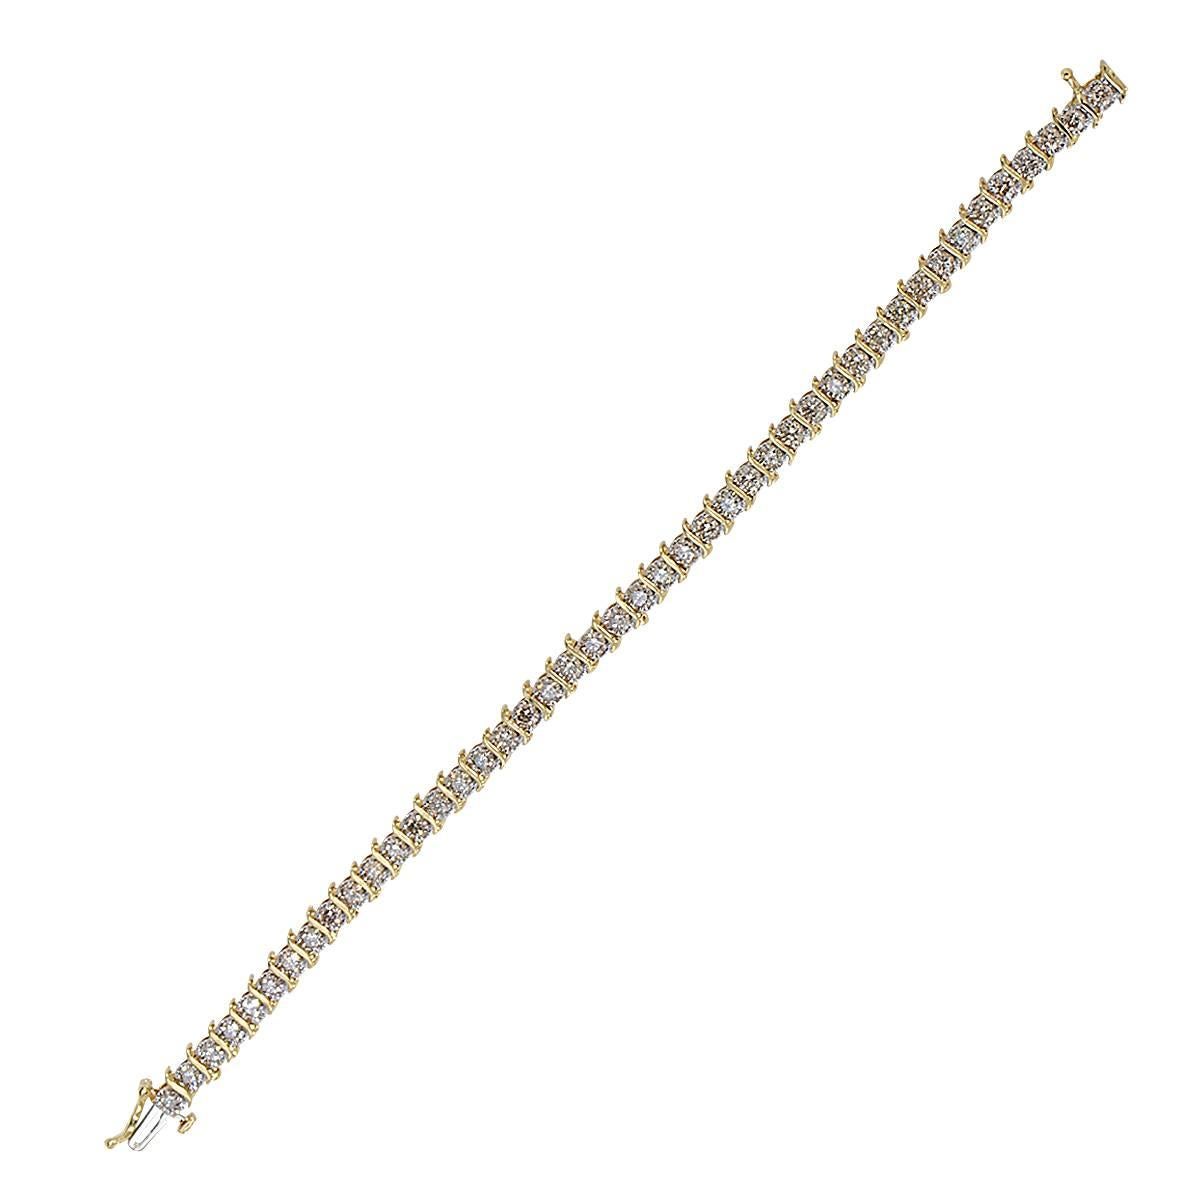 14k yellow gold diamond tennis bracelet containing 44 round brilliant cut diamonds weighing approximately 5cts total, K color, SI clarity.

Metal weight: 11.66 grams

This diamond bracelet is accompanied by a retail appraisal performed by a GIA